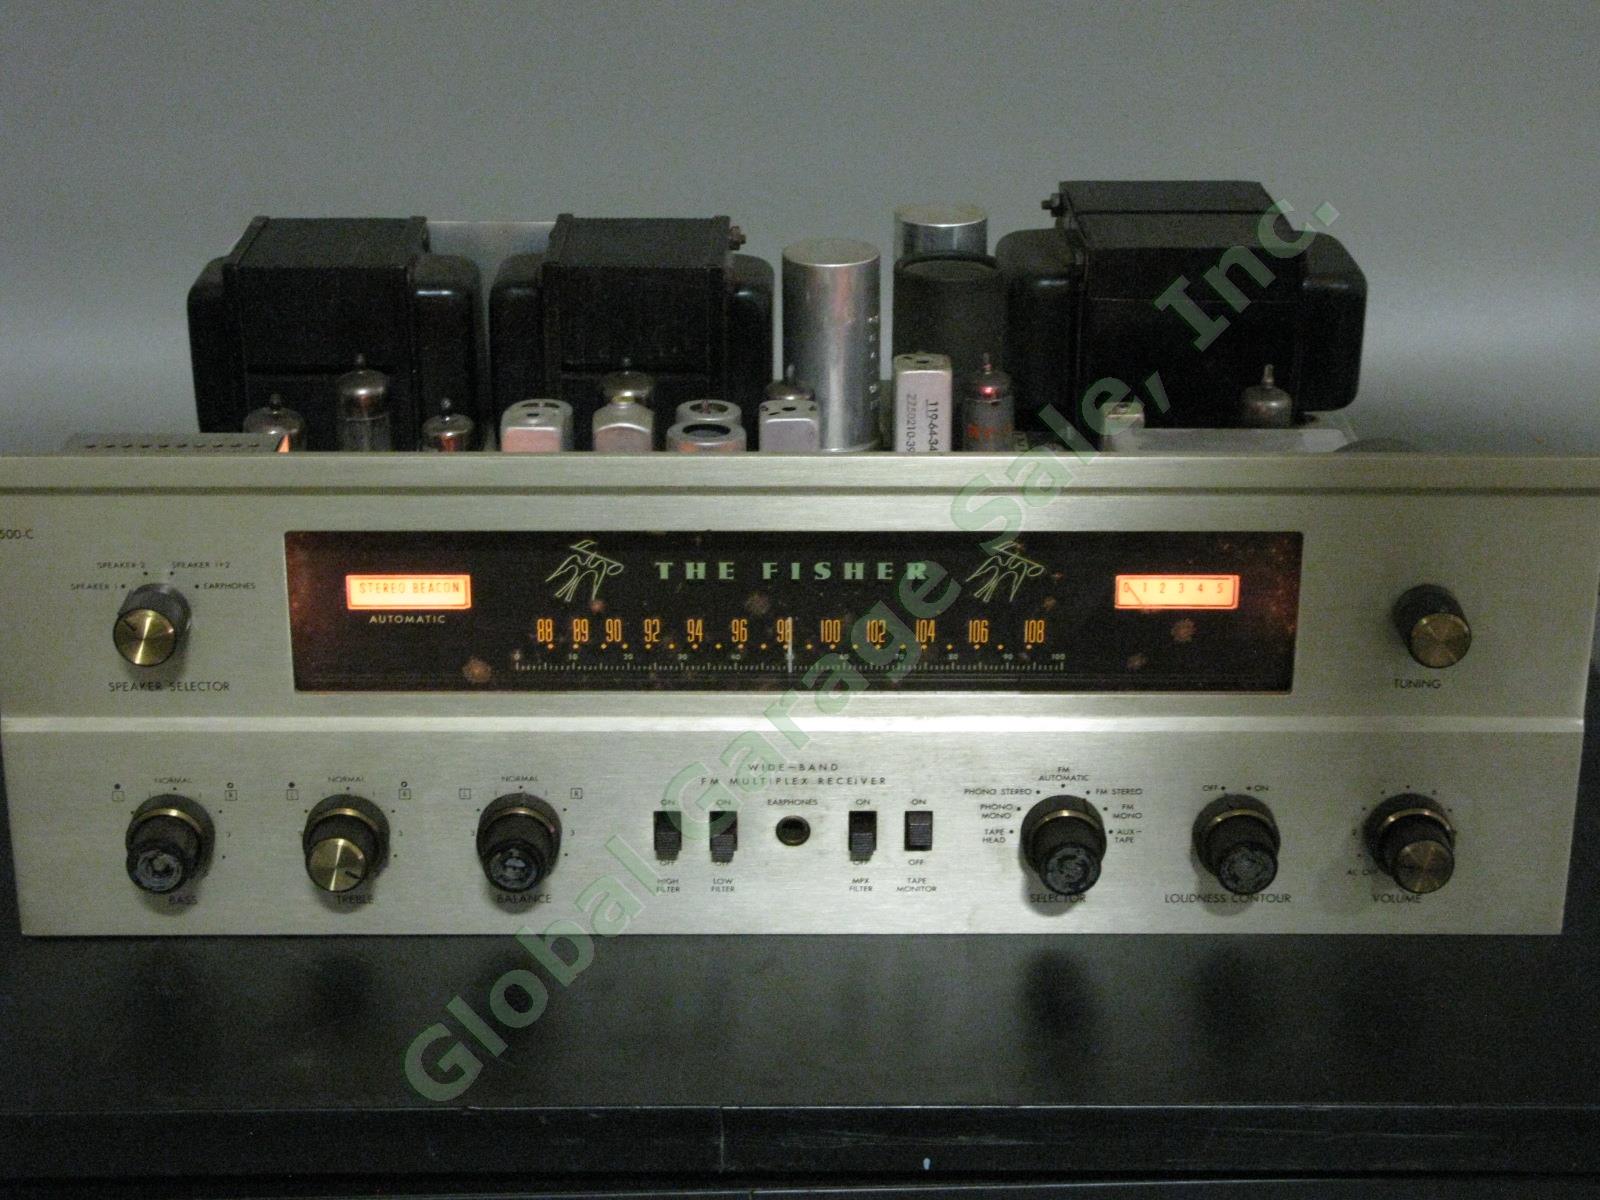 VTG Fisher 500-C Stereophonic FM Multiplex Tube Stereo Receiver Good Working Con 13